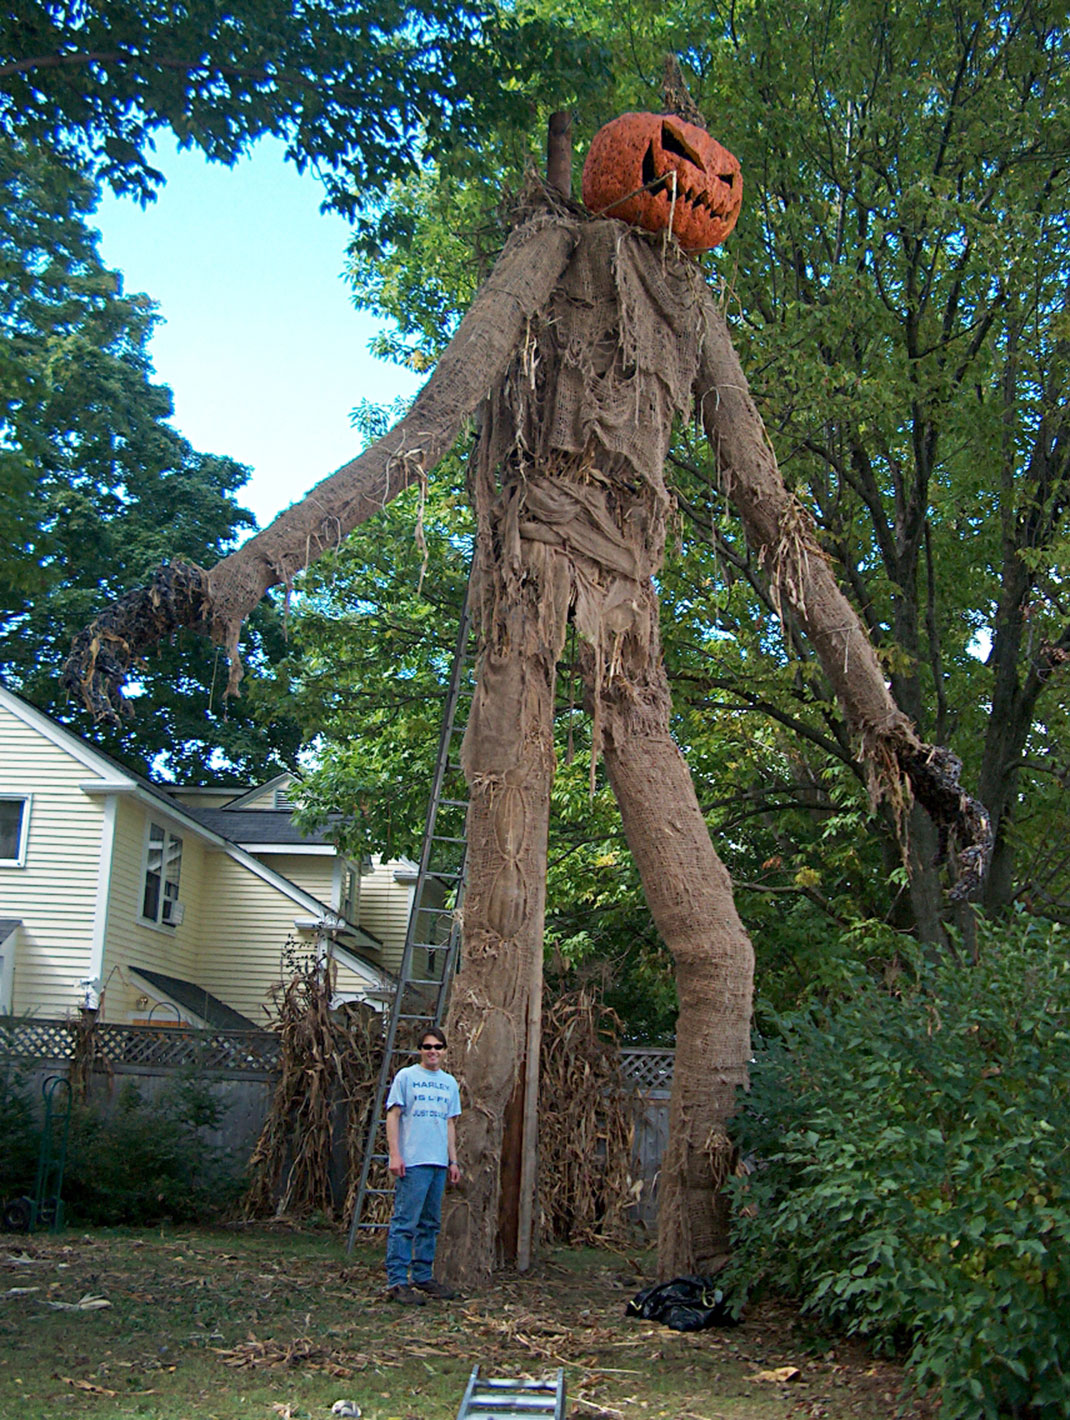 Giant Halloween Decorations to Add Some Fright